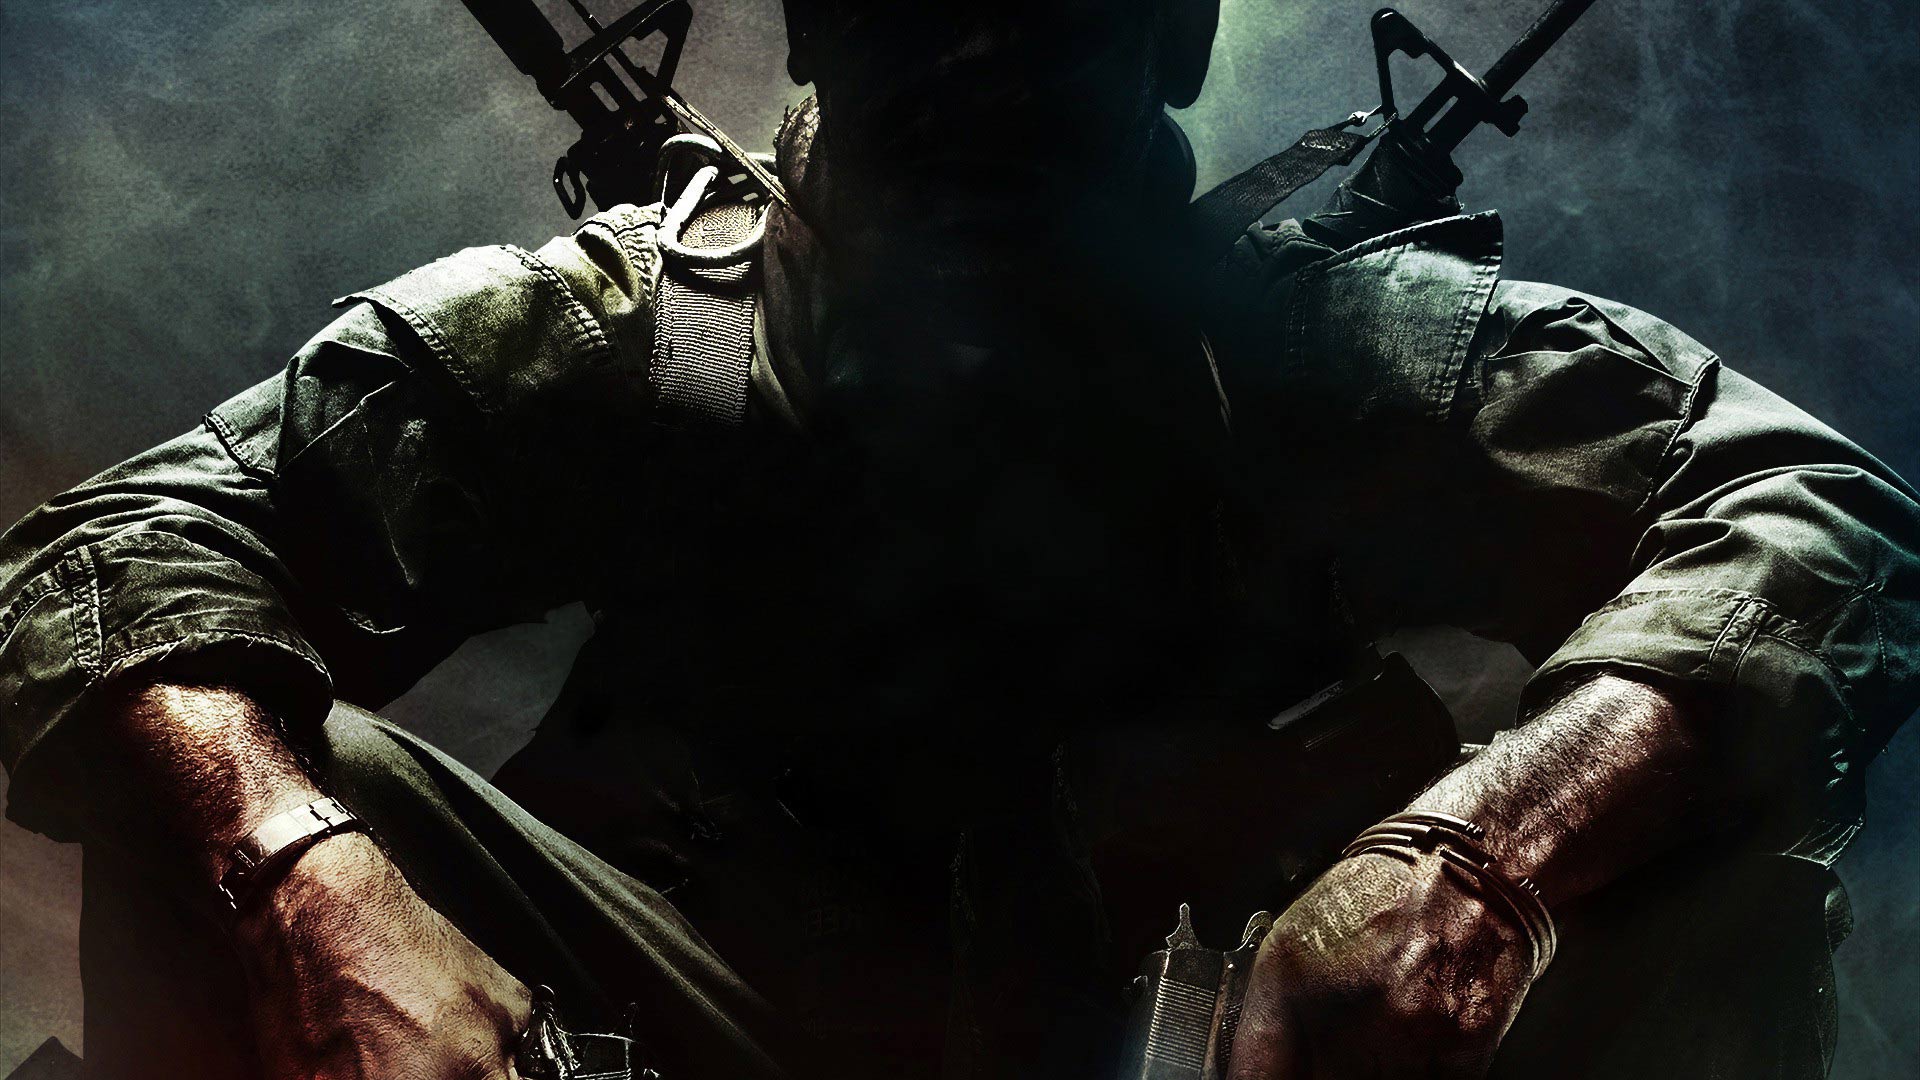 Creating a Portrait of the Iconic 'Ghost' from Modern Warfare 2